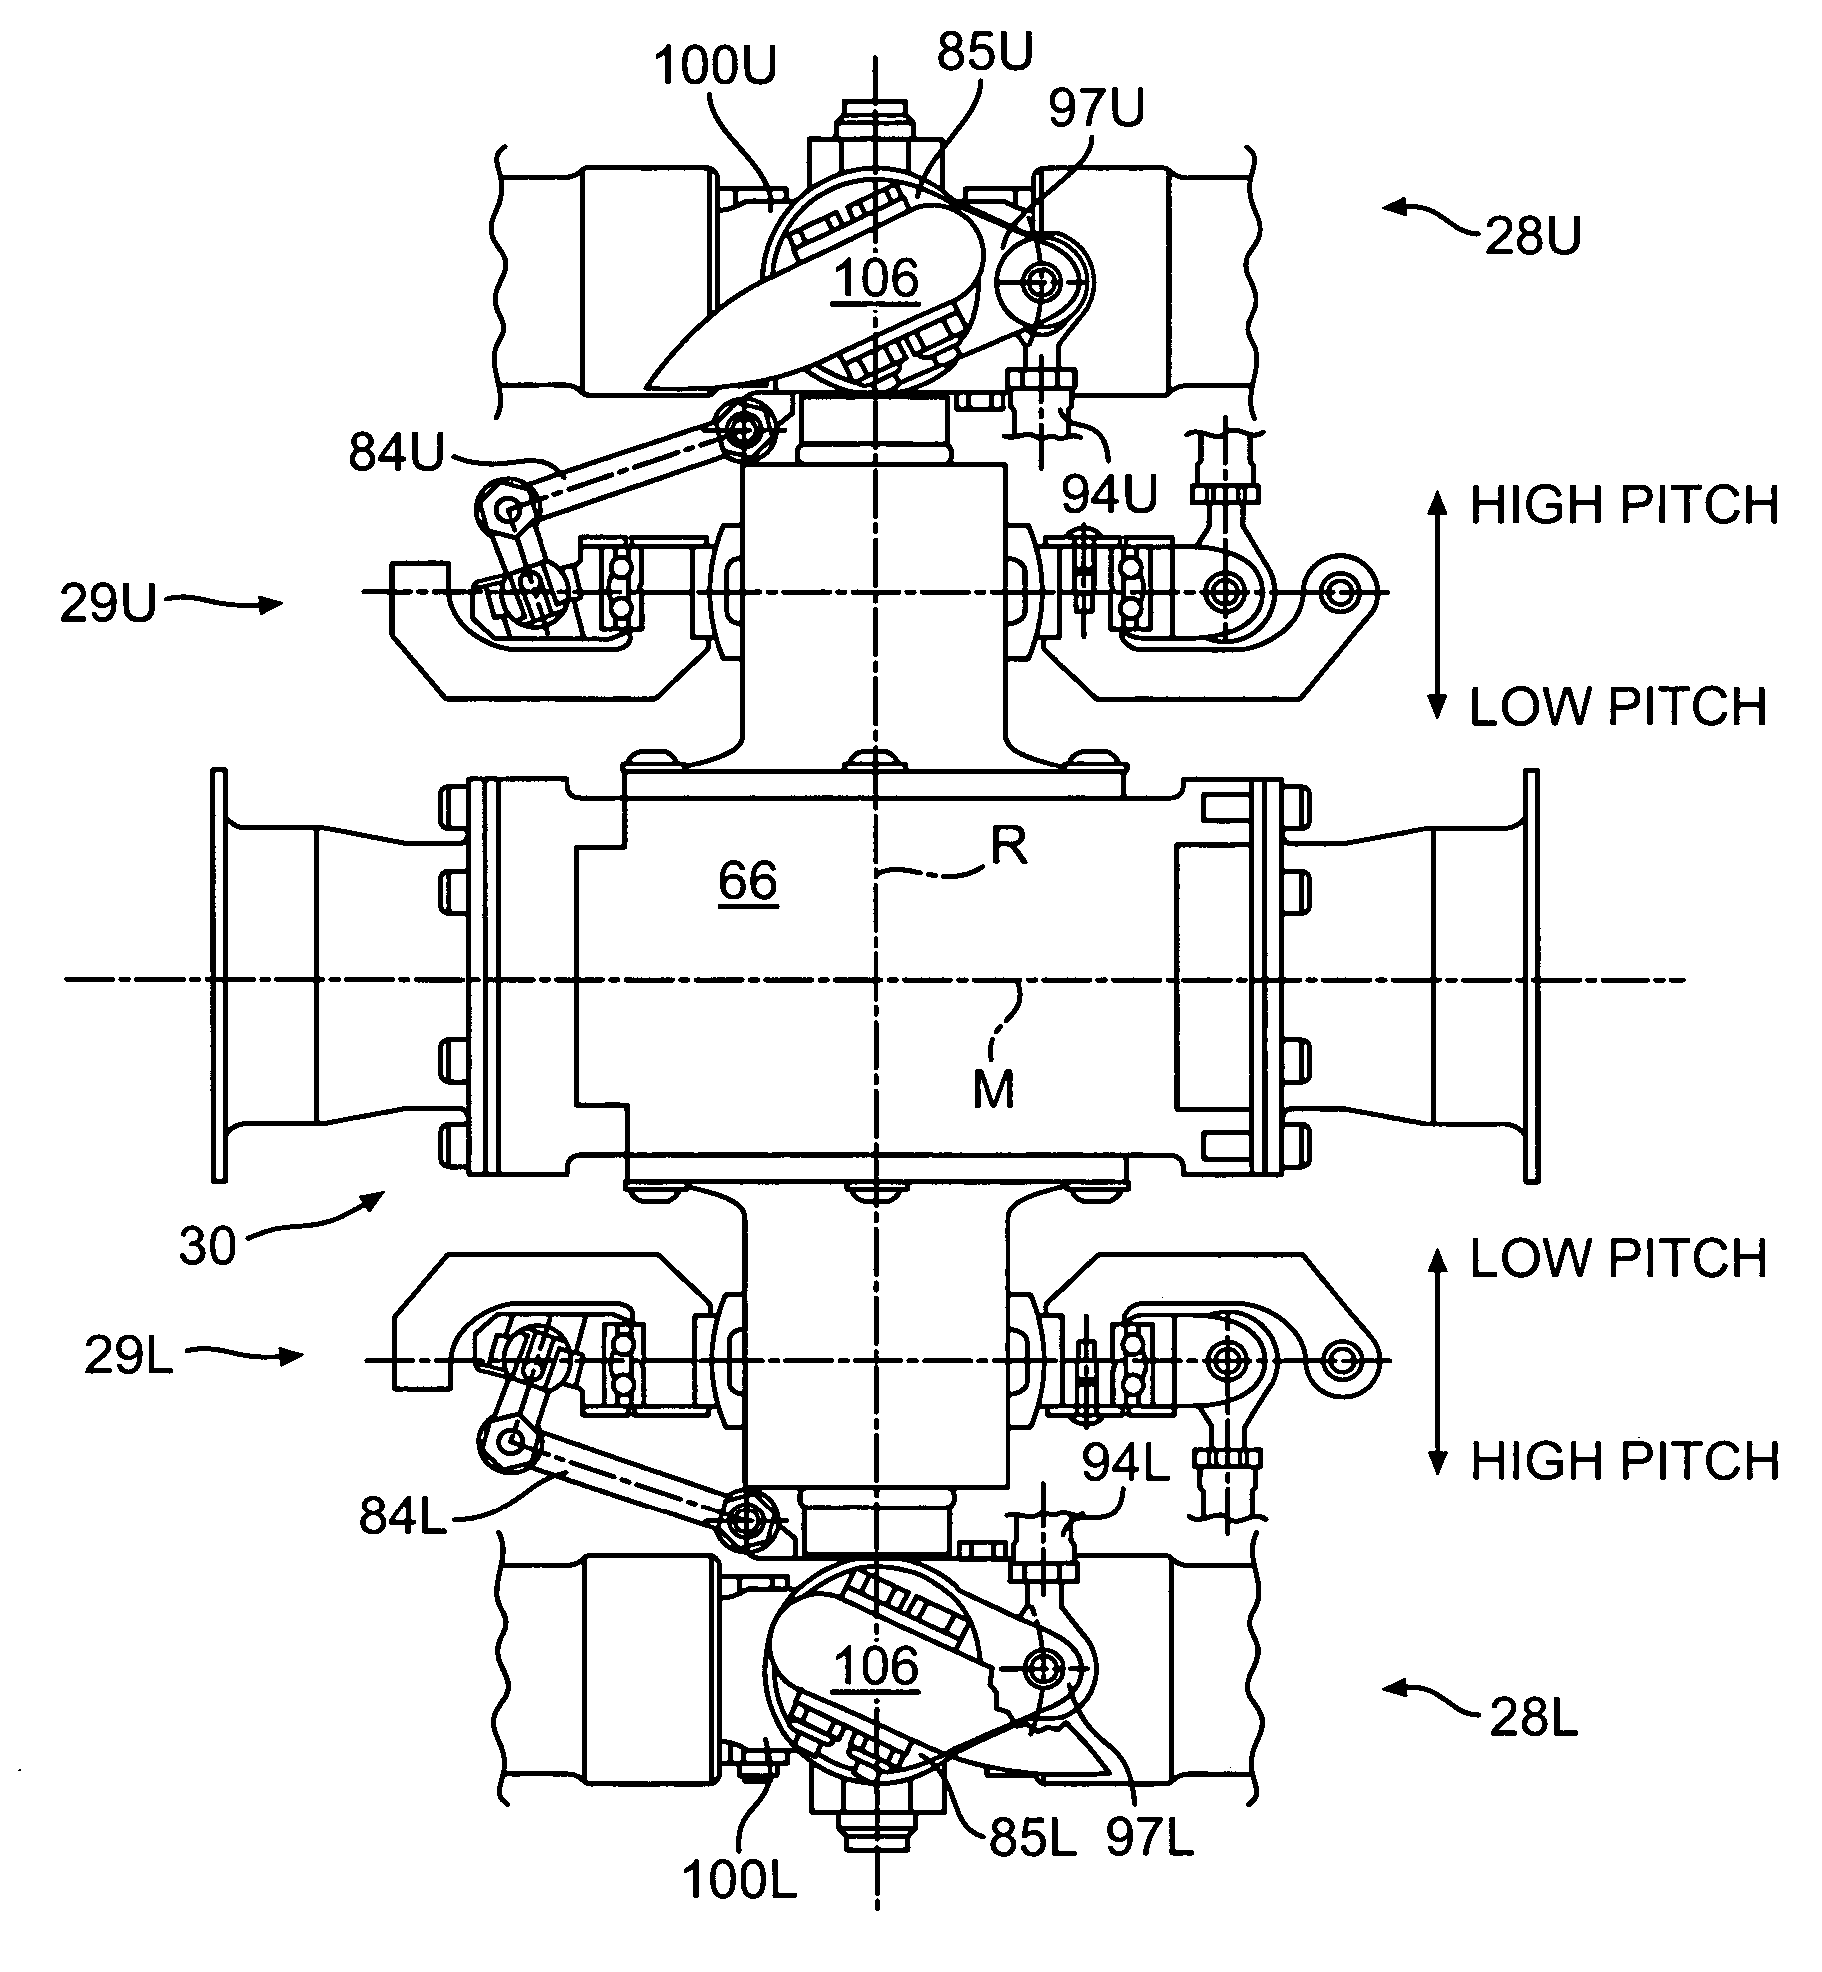 Swashplate and pitch link arrangement for a coaxial counter rotating rotor system